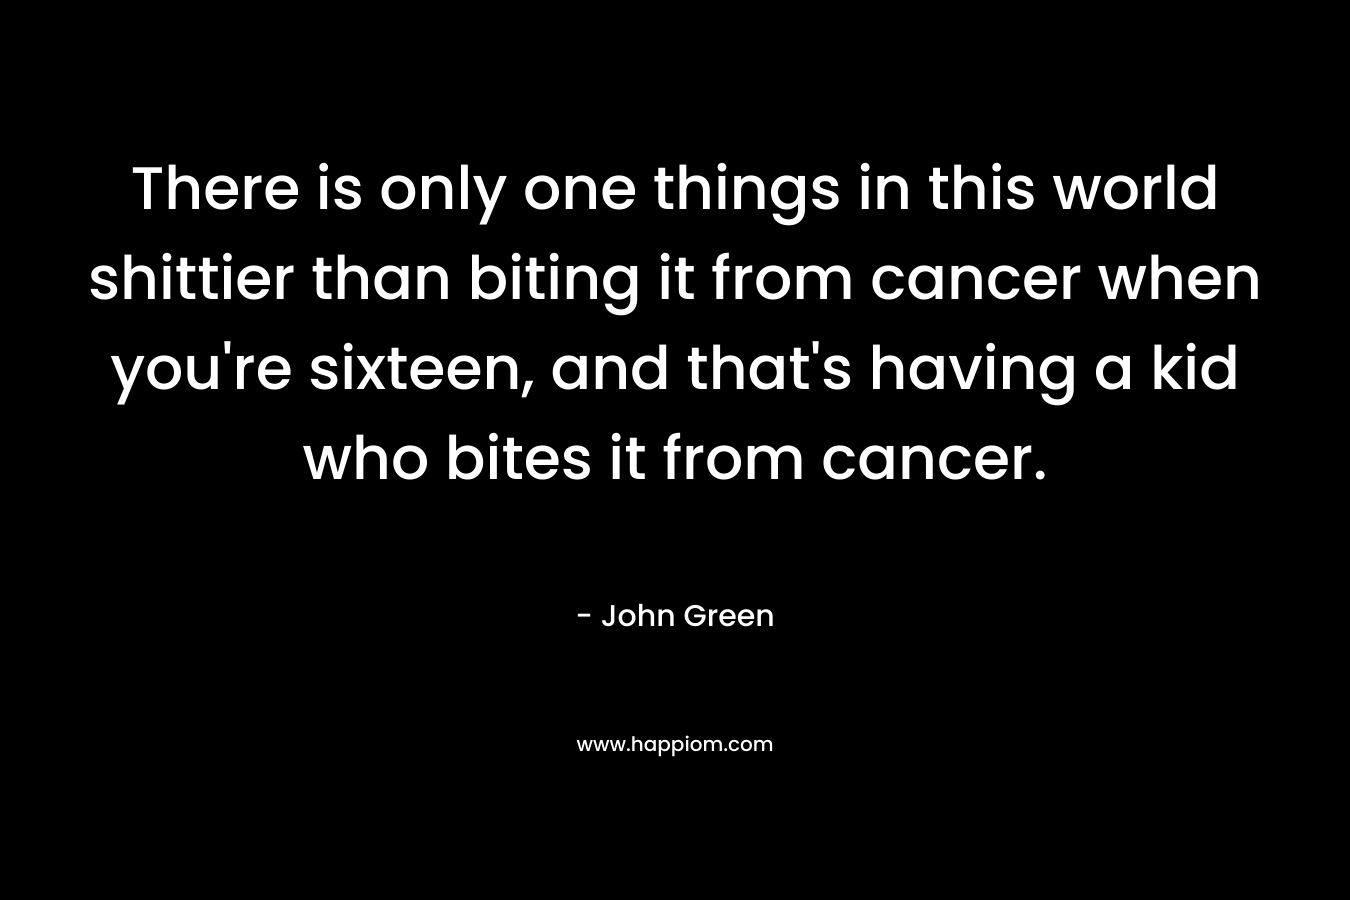 There is only one things in this world shittier than biting it from cancer when you’re sixteen, and that’s having a kid who bites it from cancer. – John Green